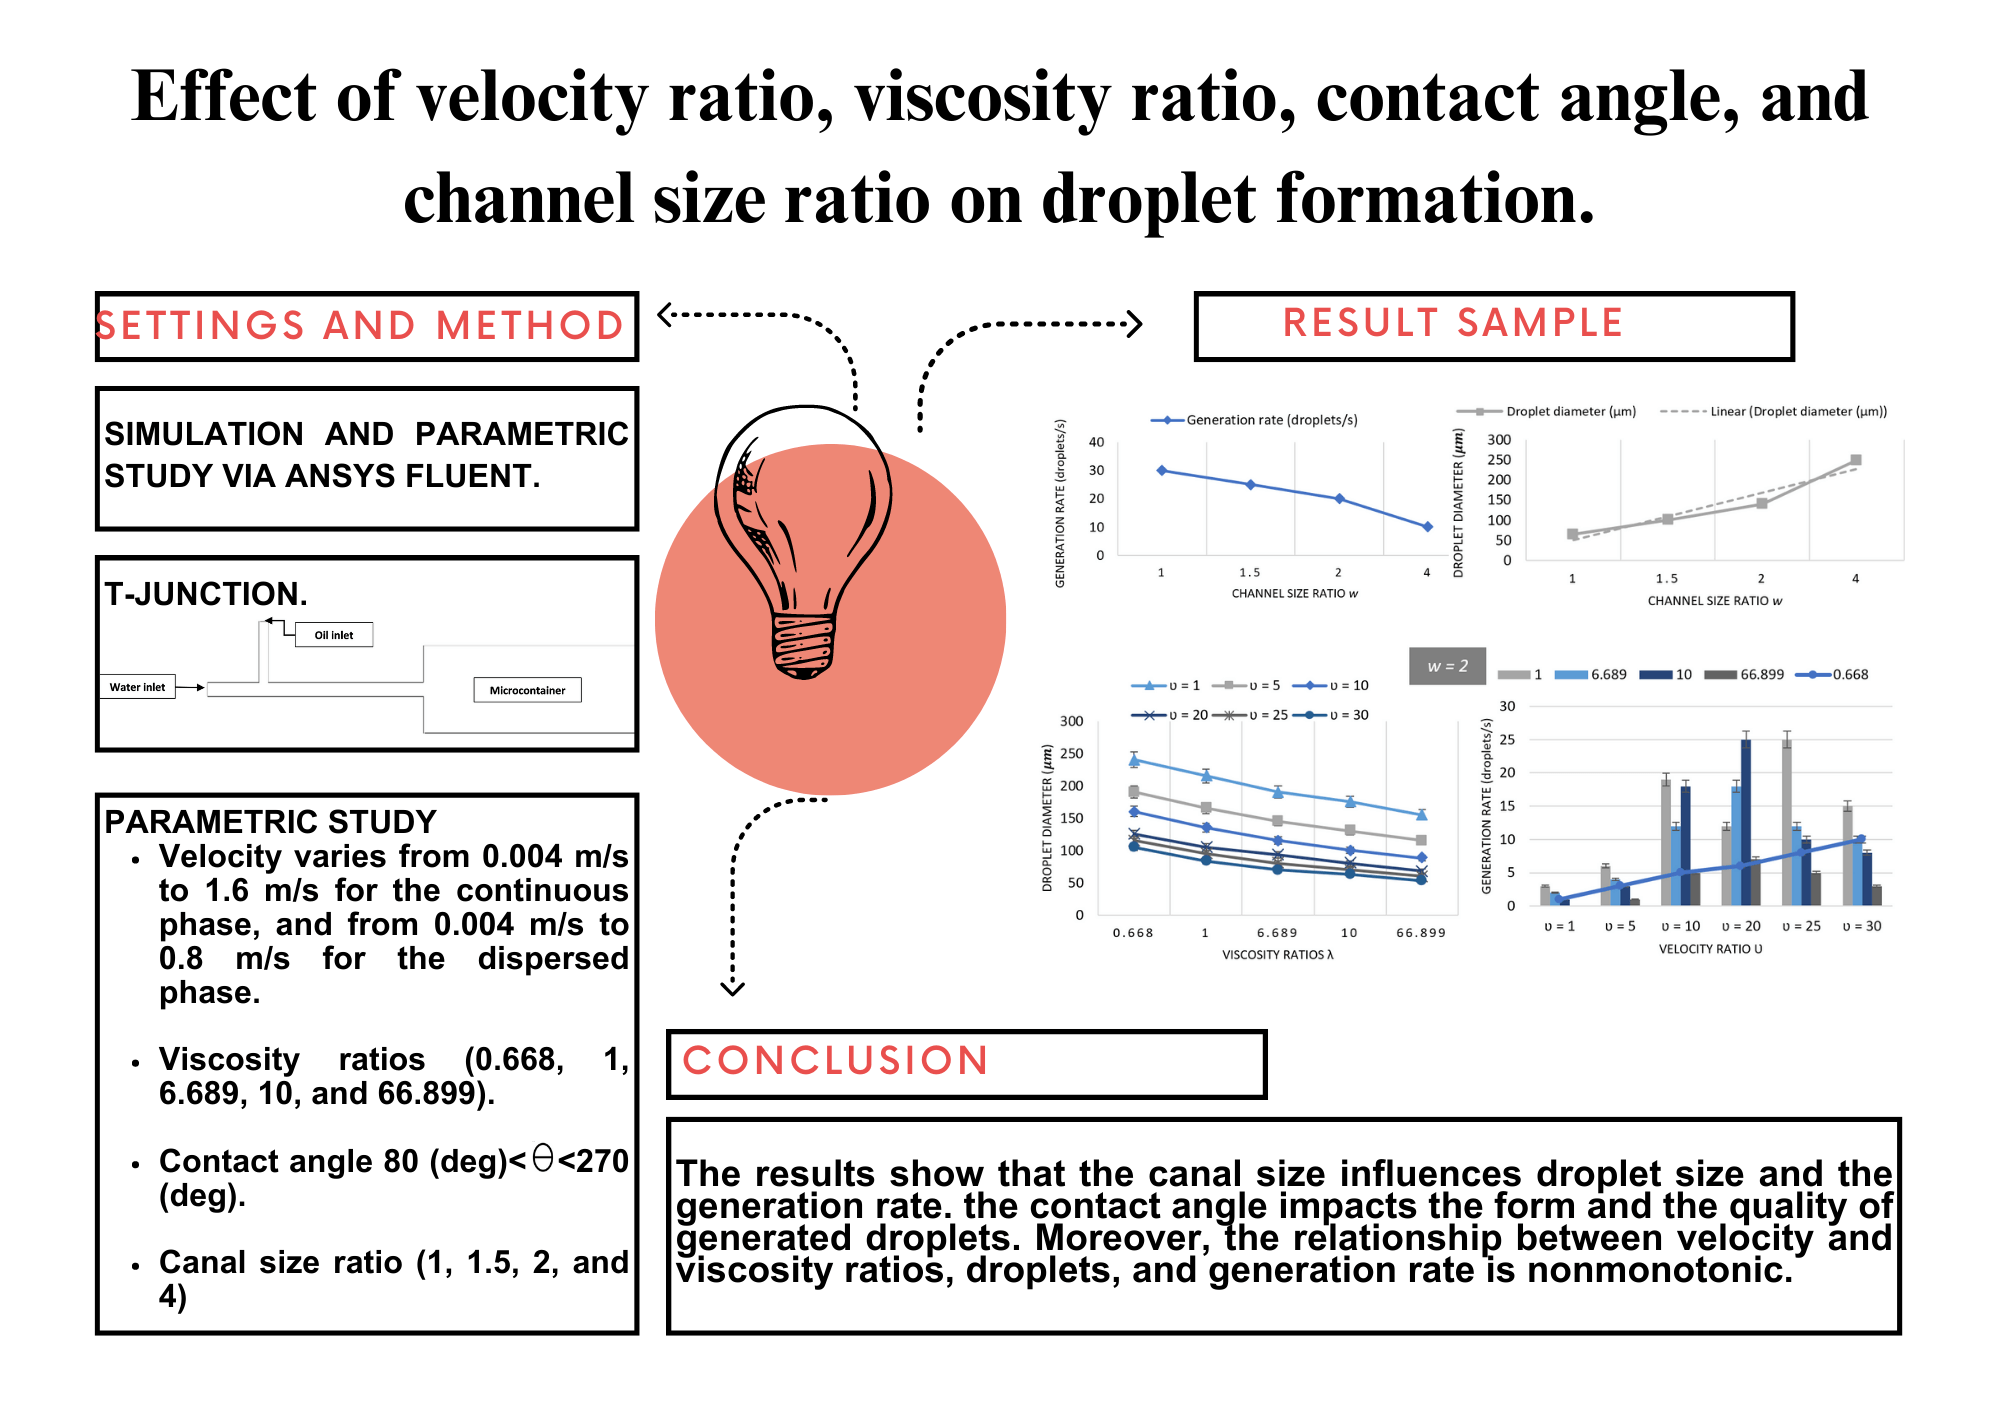 Effect of Velocity Ratio, Viscosity Ratio, Contact Angle, and Channel Size Ratio on Droplet Formation